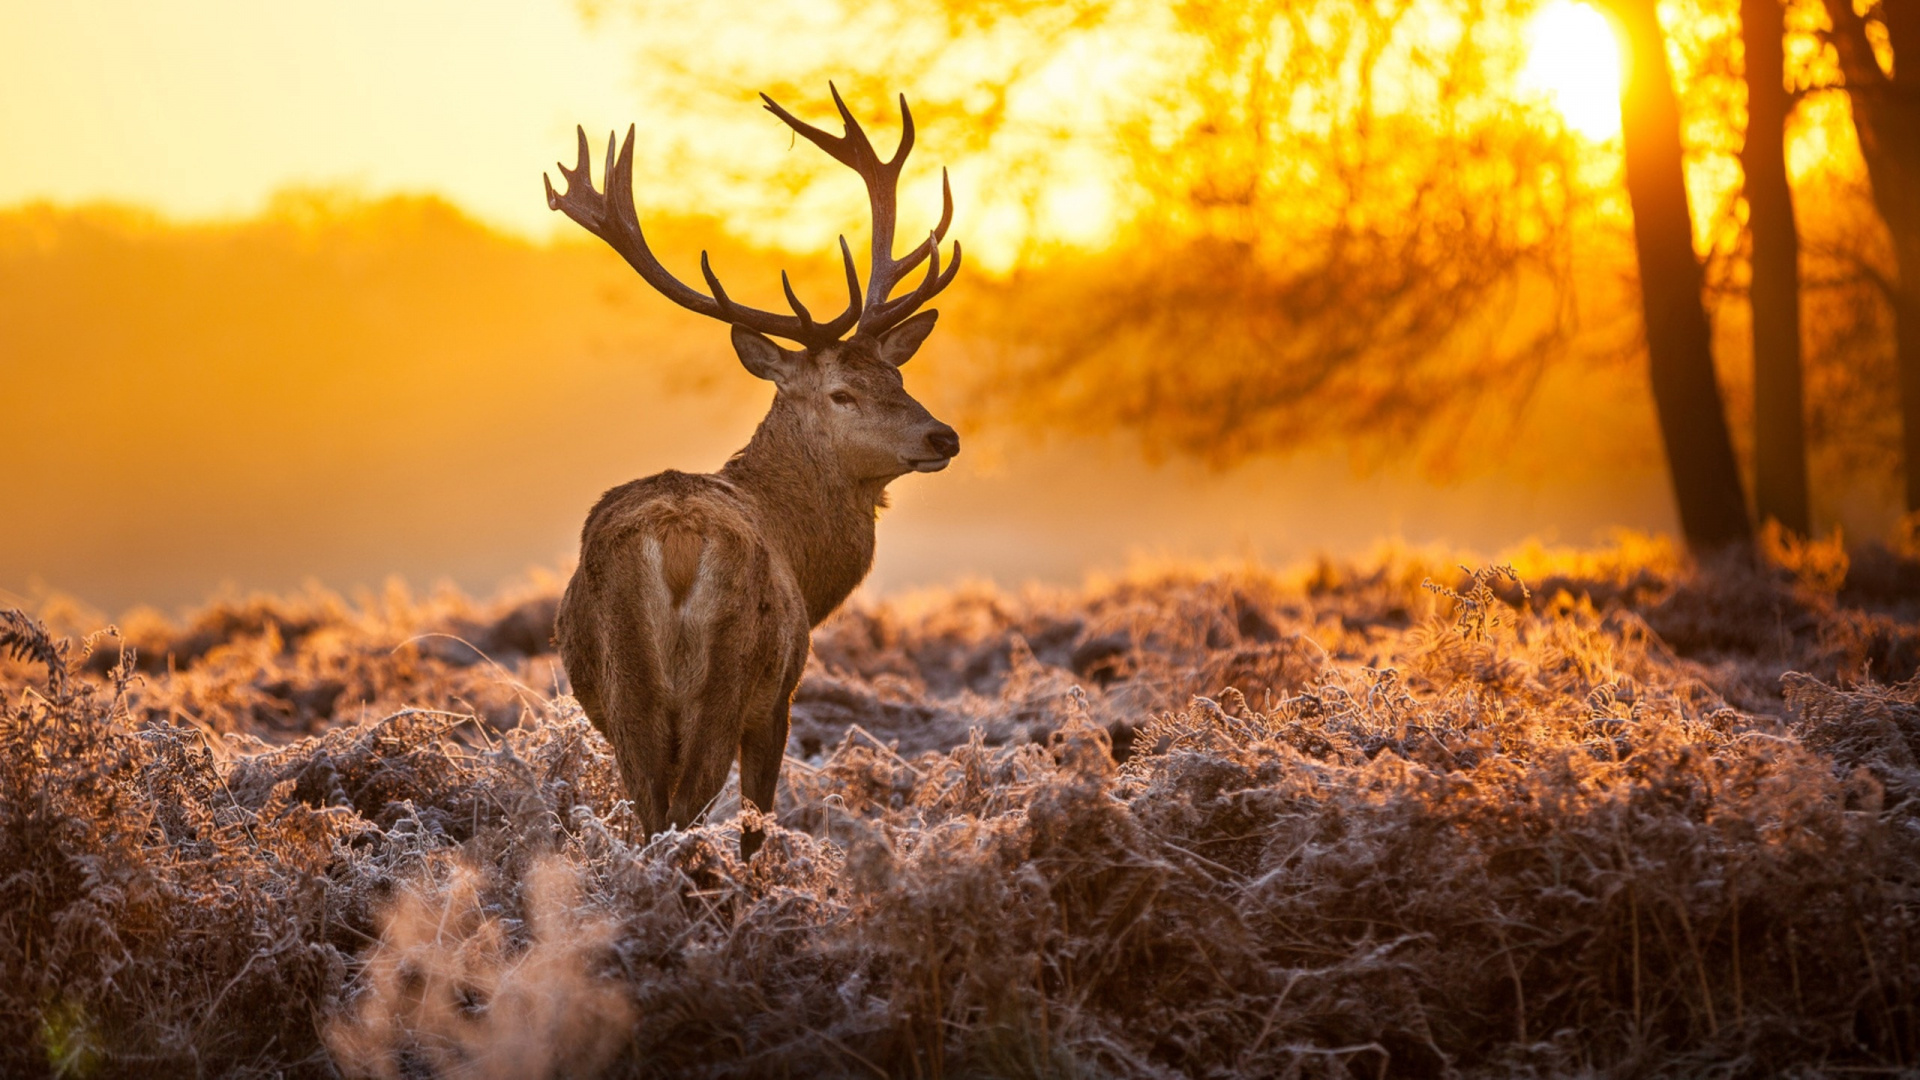 Brown Deer on Brown Grass During Sunset. Wallpaper in 1920x1080 Resolution